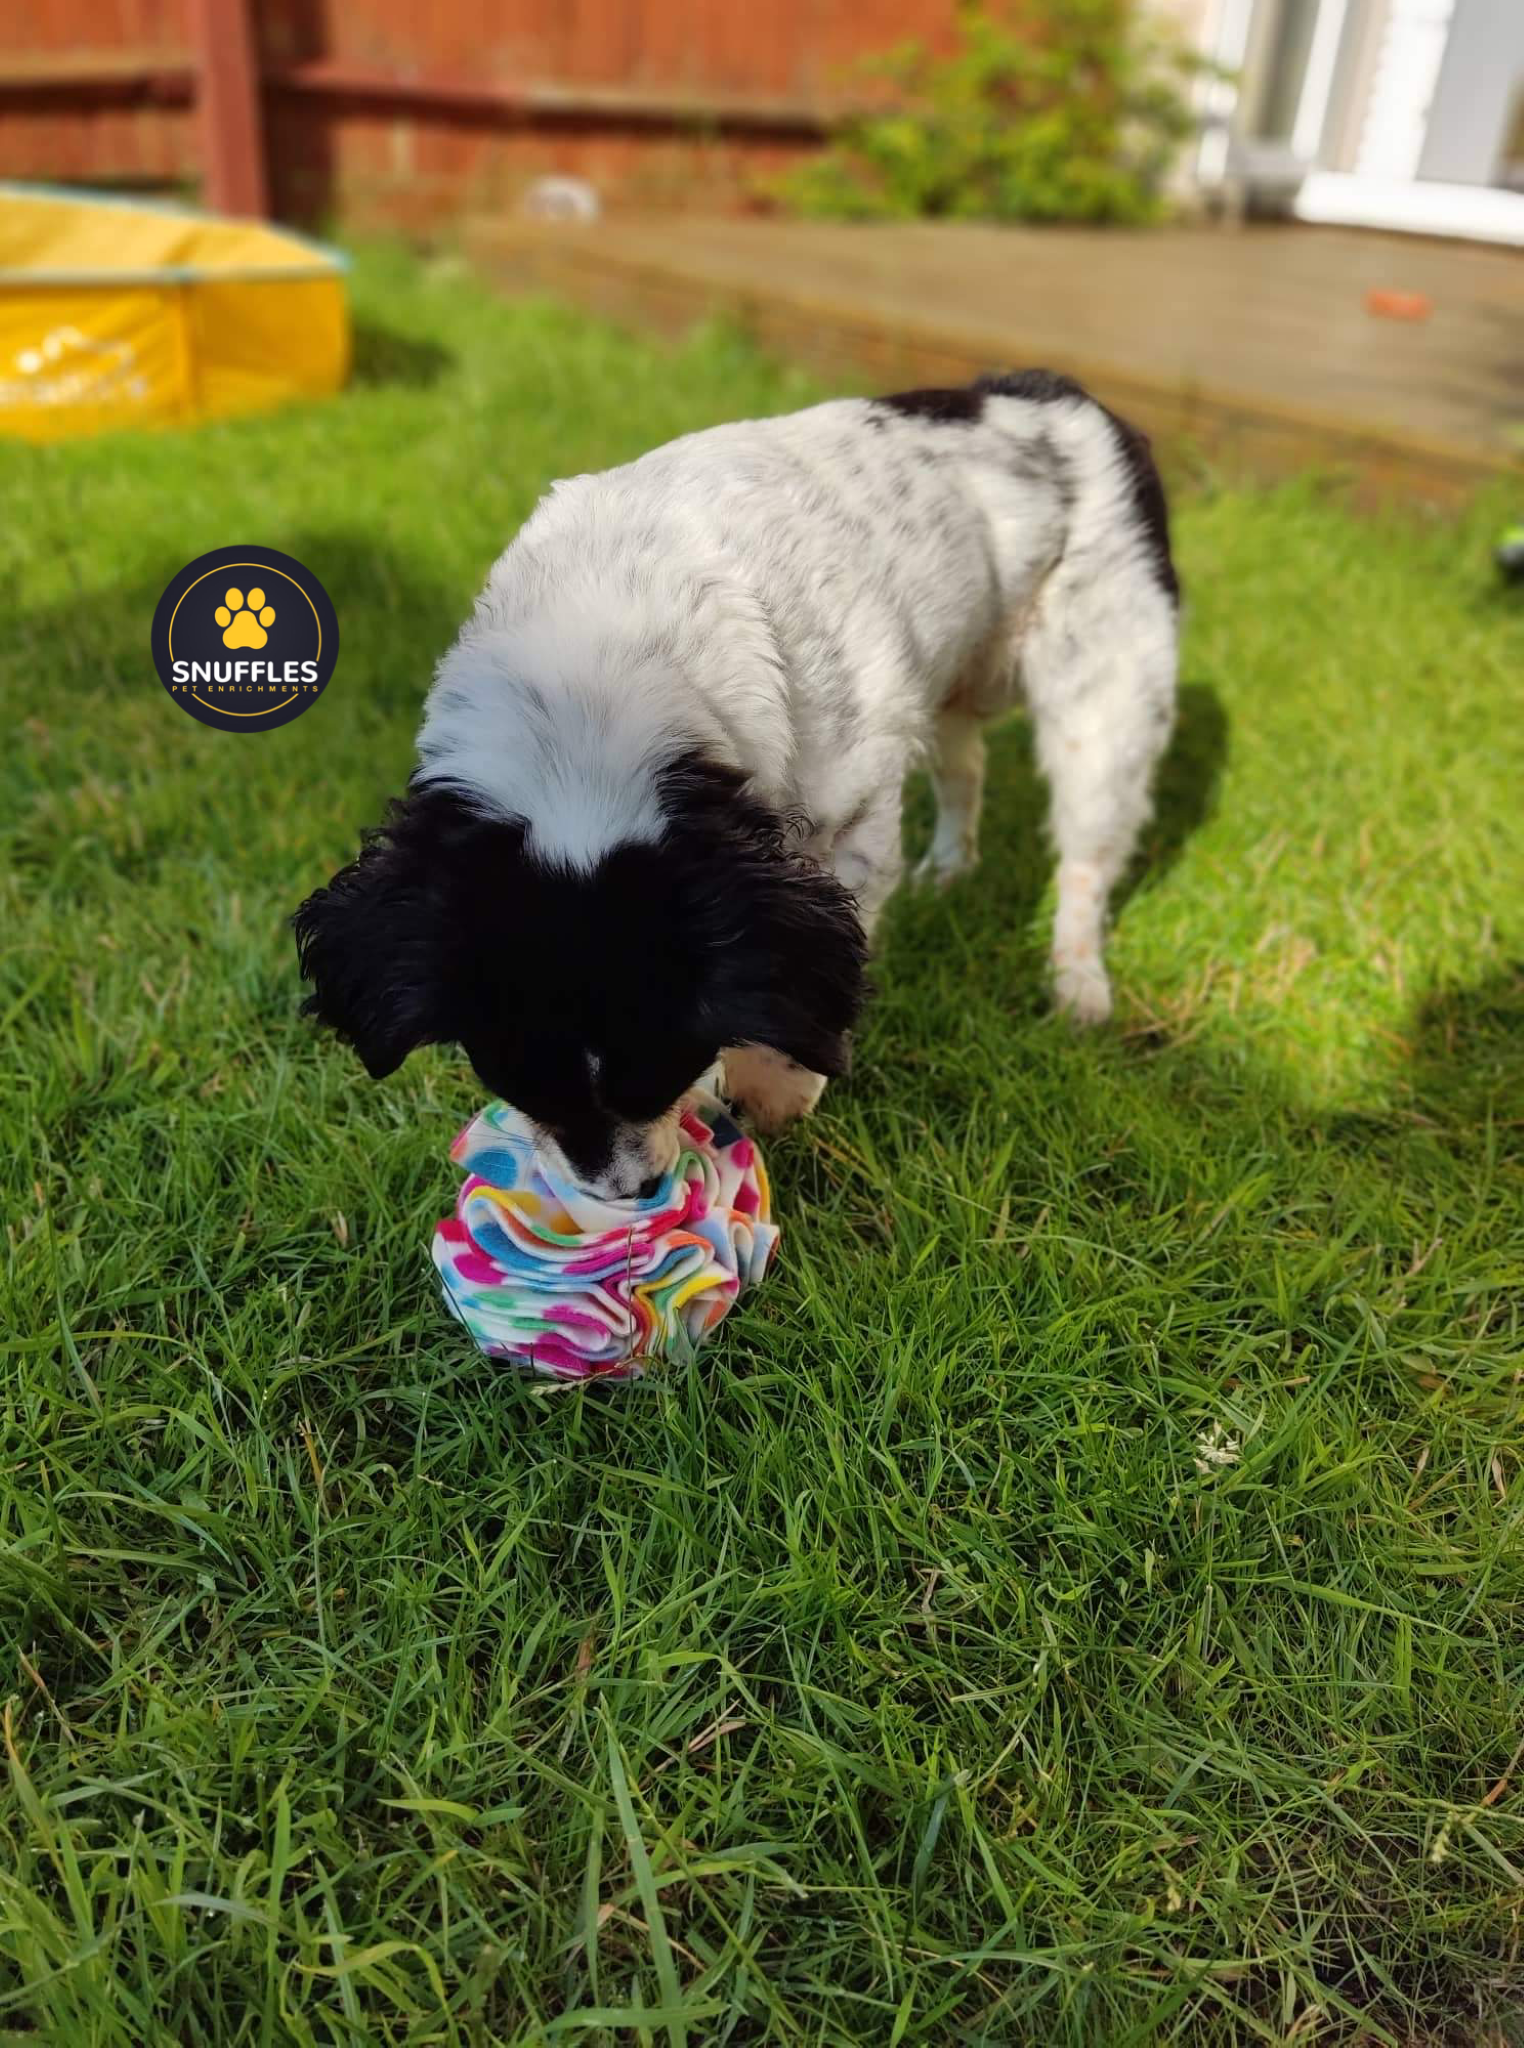 Medium Snuffle Ball For Dogs, 10 Colour Options Available